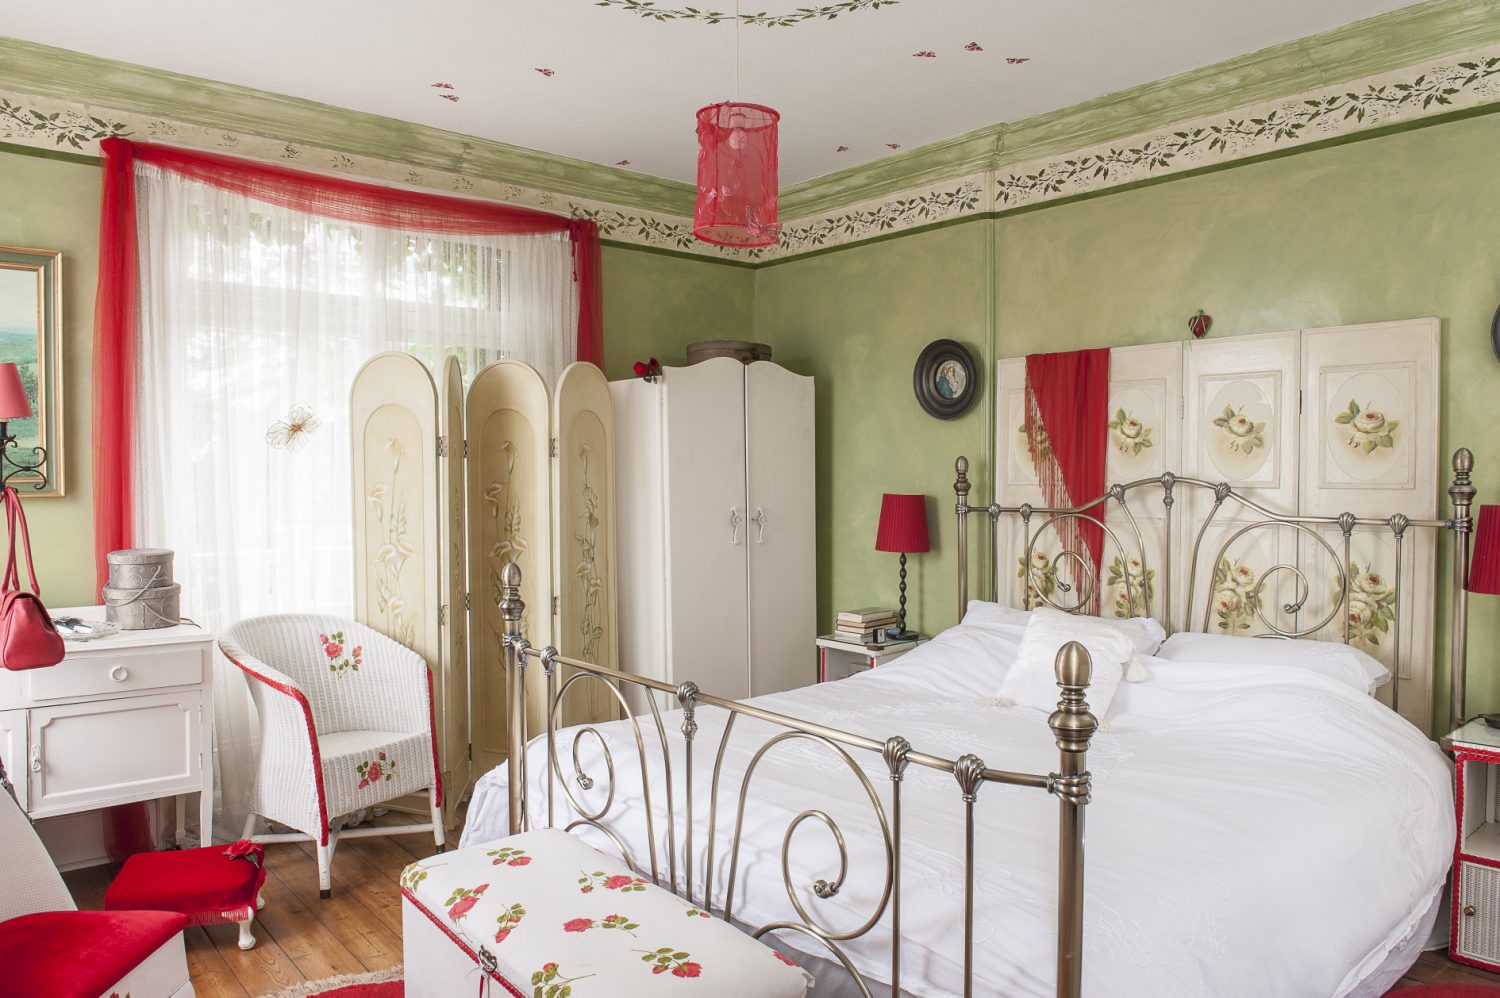 Mick and Carmel’s room is a bright and airy retreat. Accents of olive green and red, combined with Carmel’s stencils, work together to create a rather Mediterranean feel